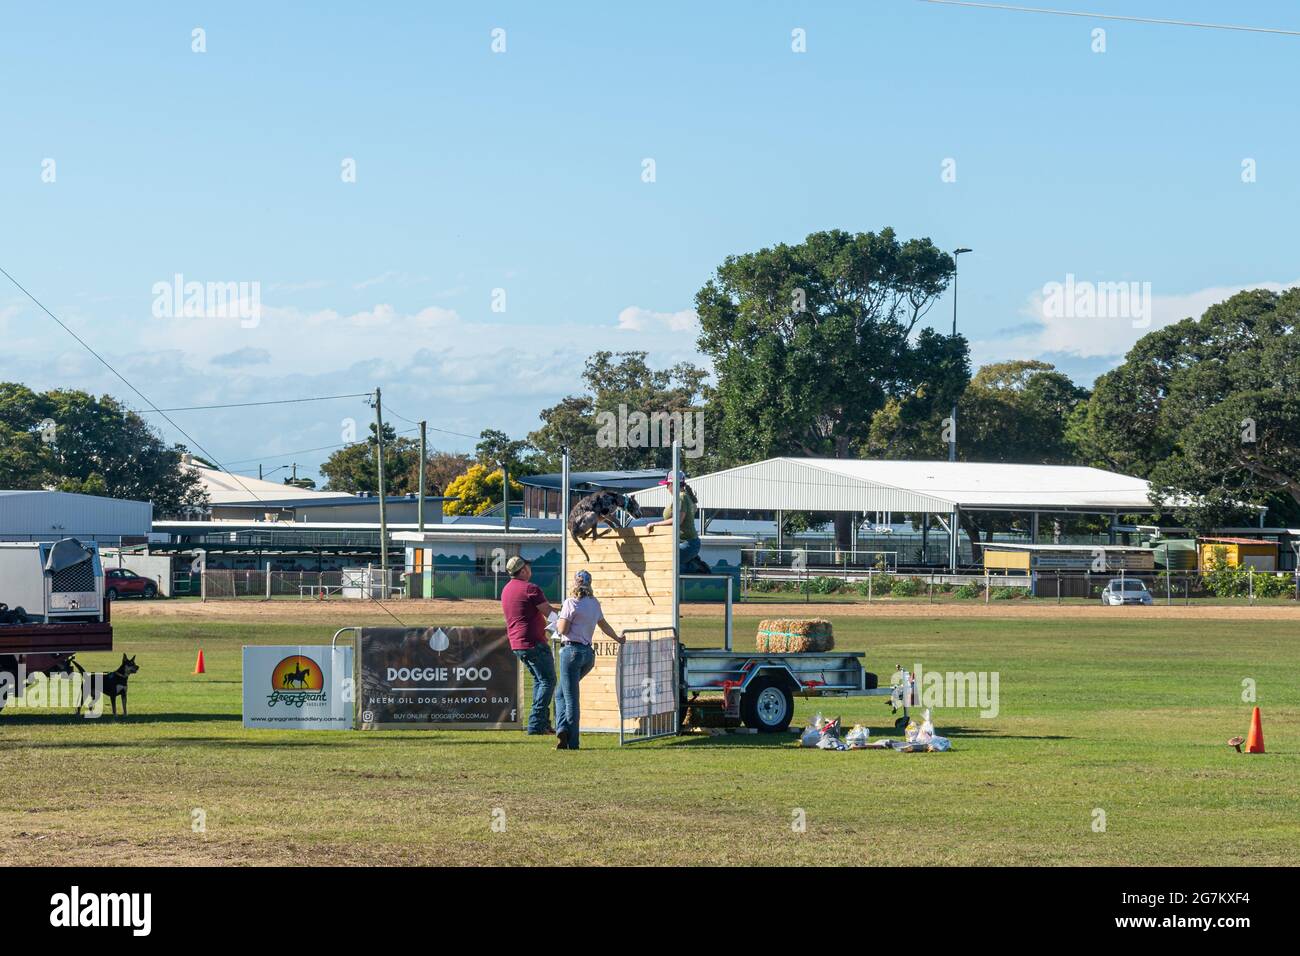 Dog jumping competition at the Redcliffe Show in Queensland, Australia Stock Photo